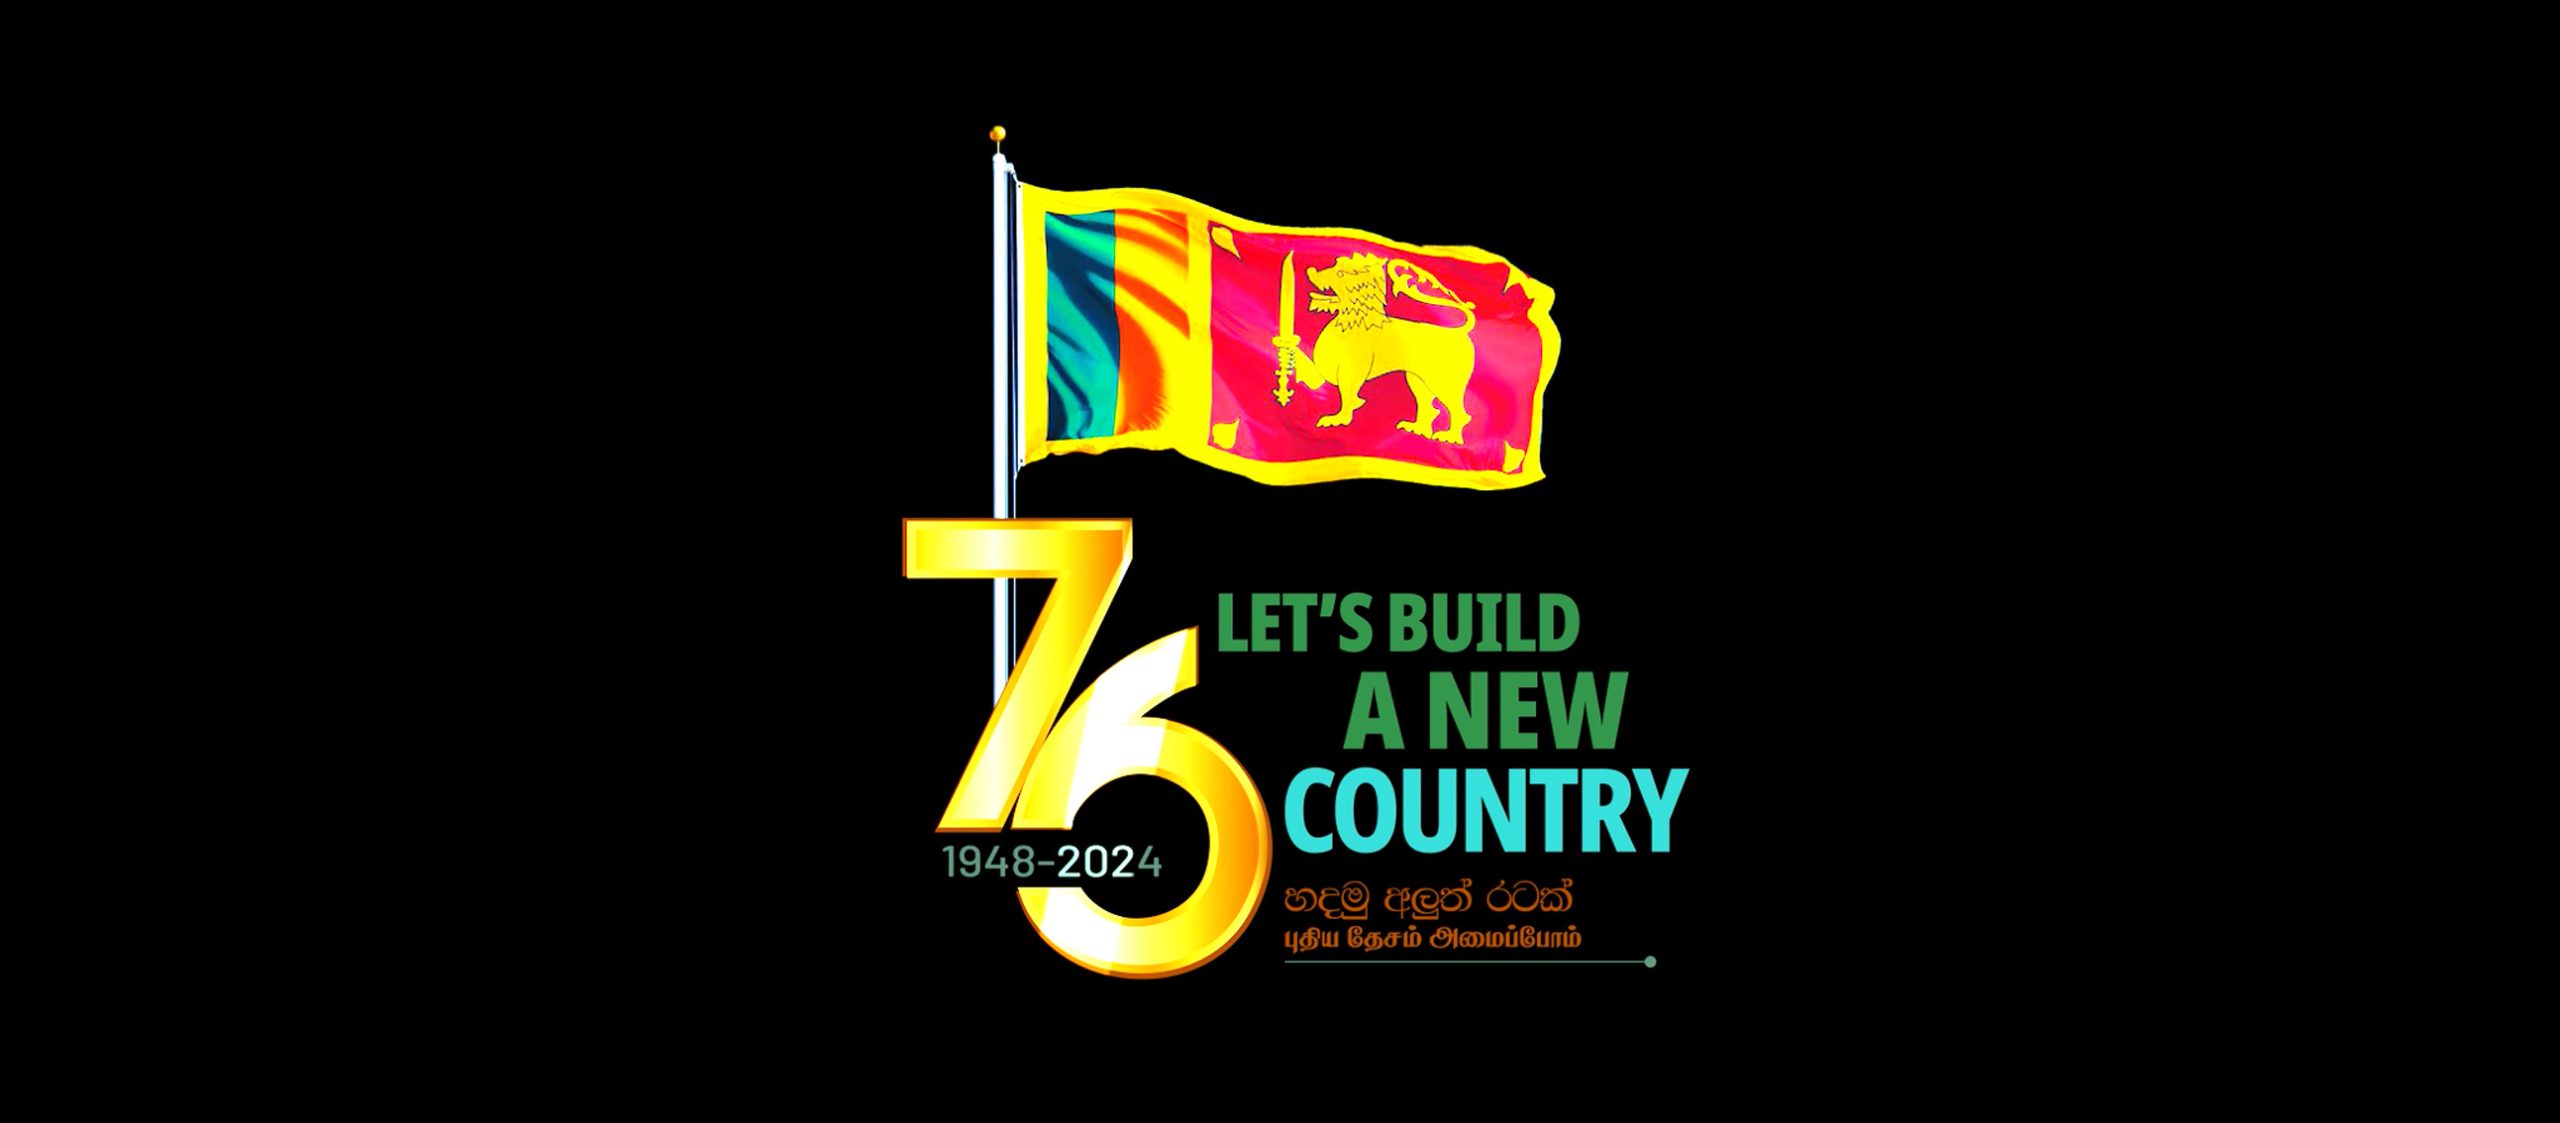 Prime Minister Dinesh Gunawardena’s message on the occasion of the 76th Anniversary of Independence Day